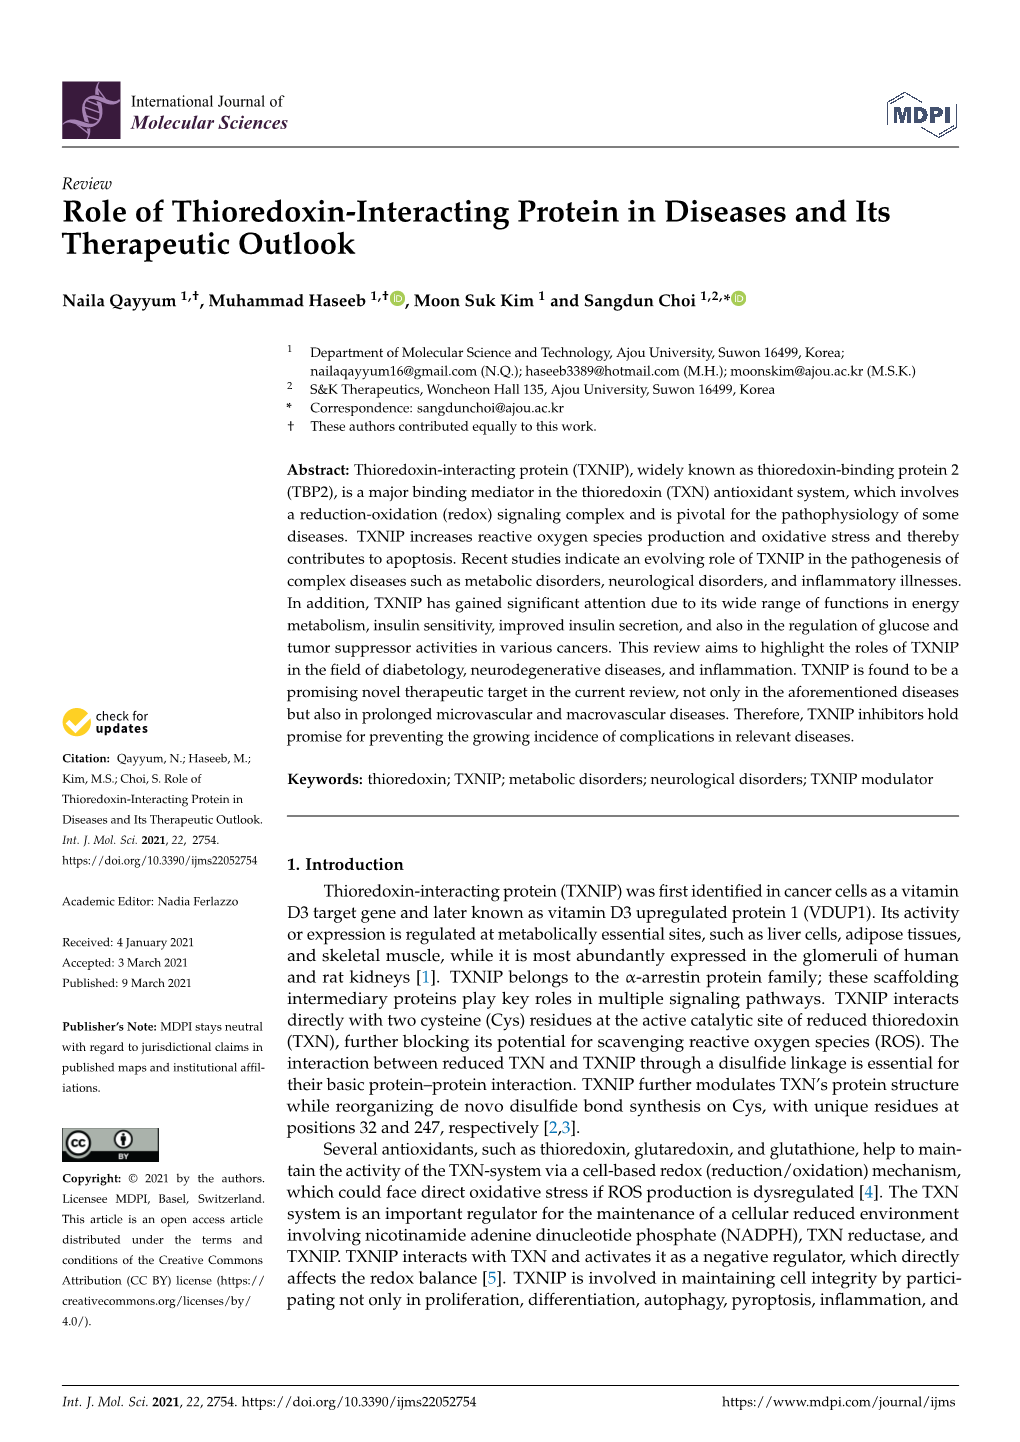 Role of Thioredoxin-Interacting Protein in Diseases and Its Therapeutic Outlook